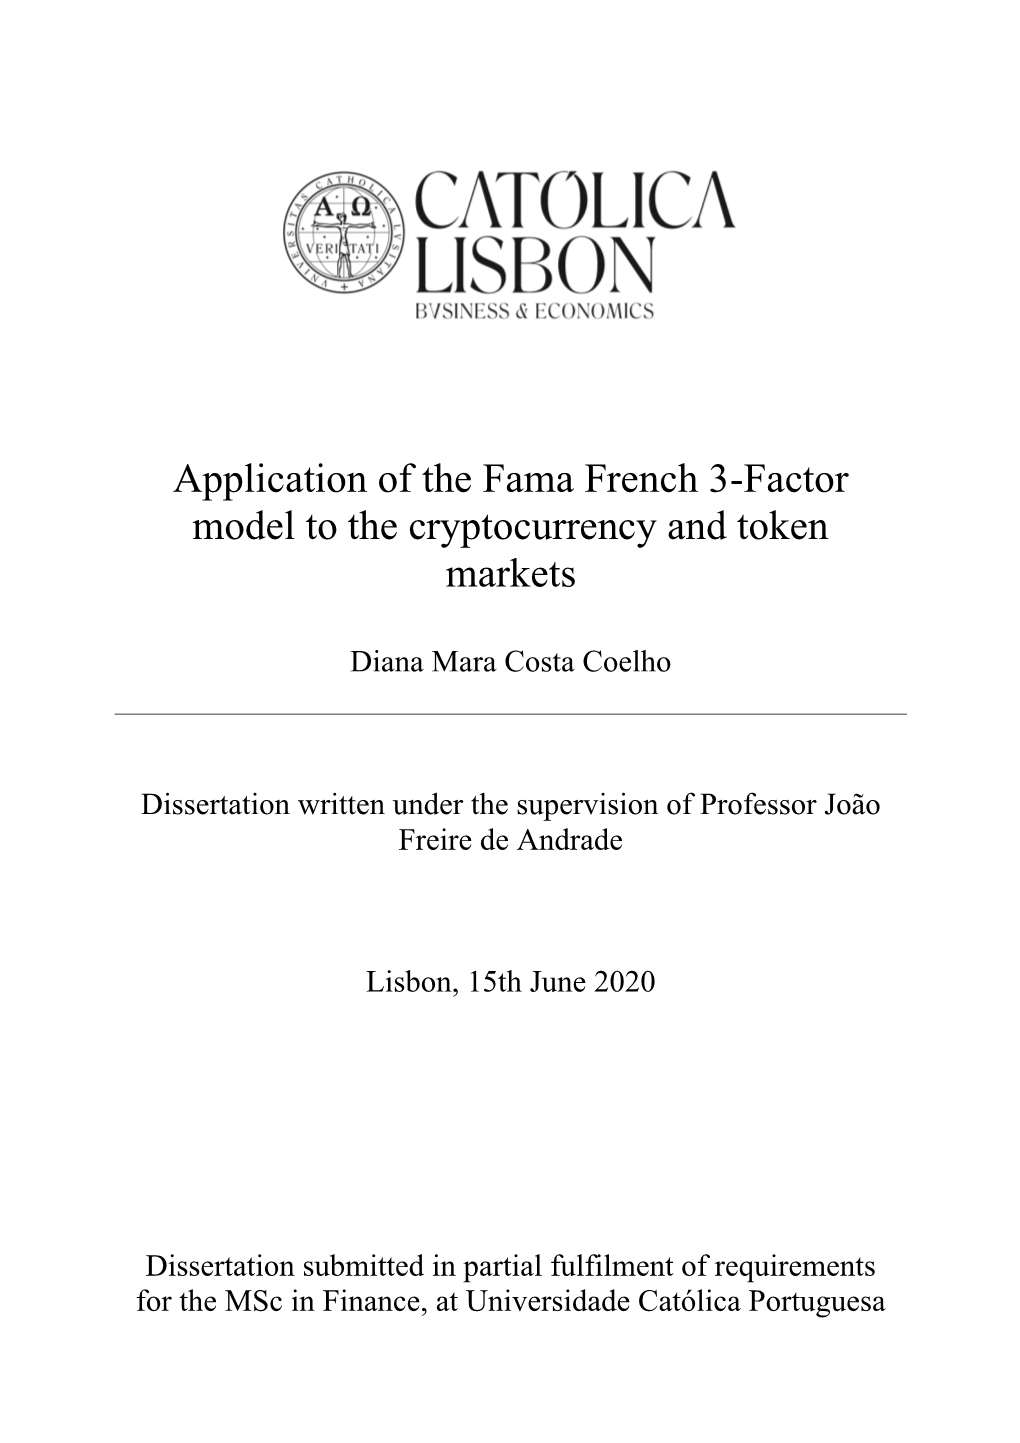 Application of the Fama French 3-Factor Model to the Cryptocurrency and Token Markets